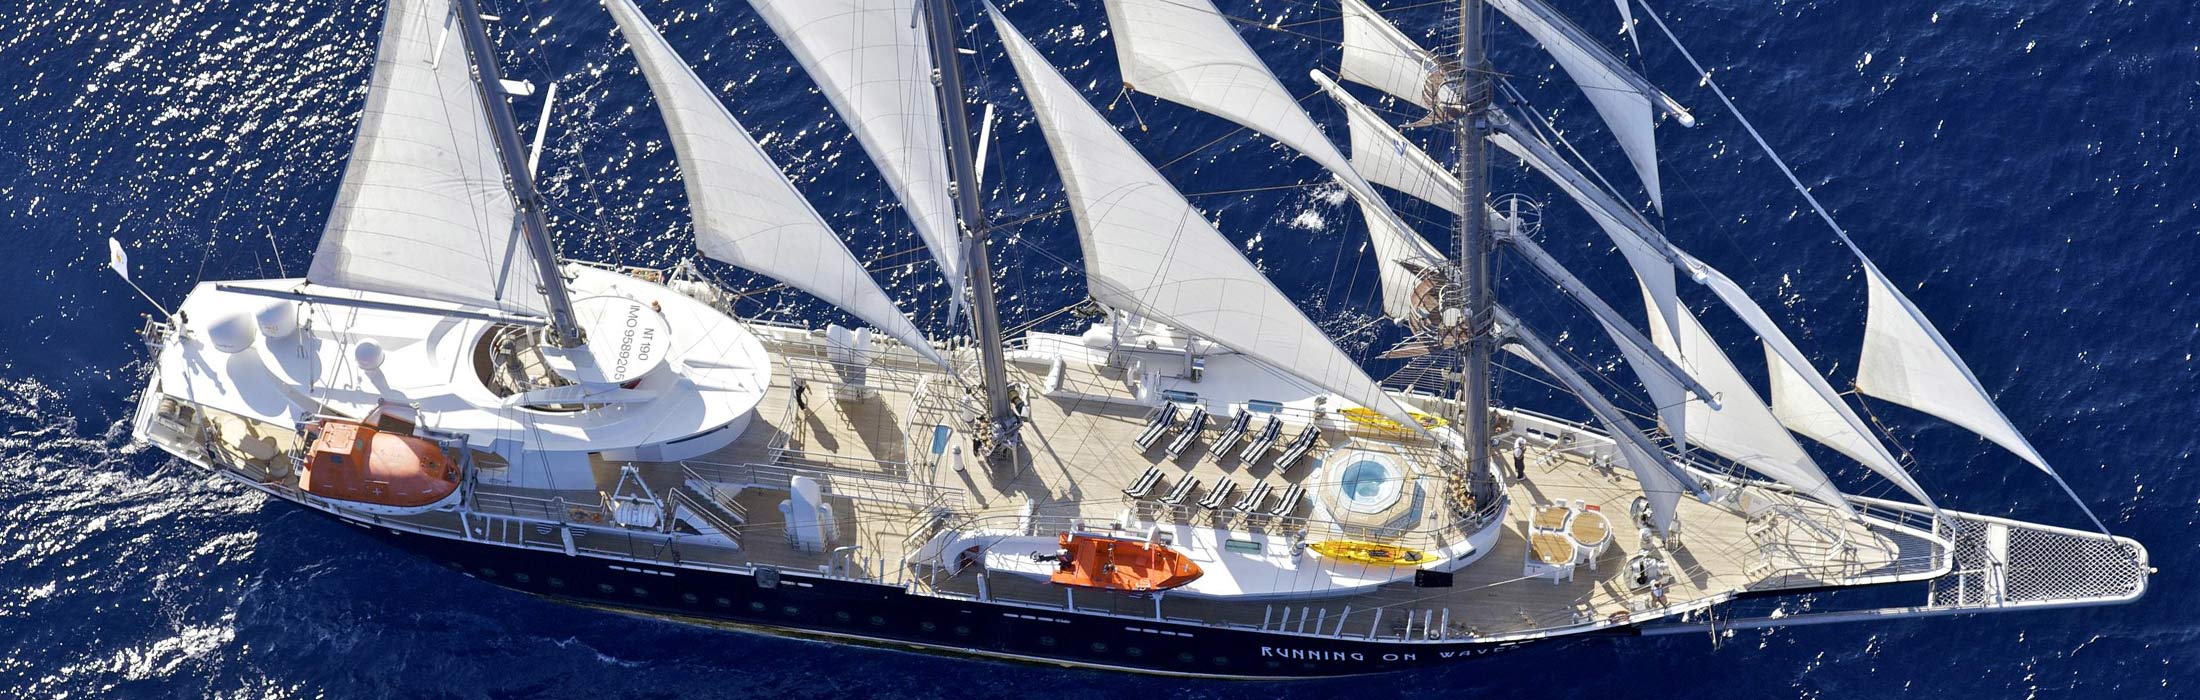 Sailing_Yachts_for_Sale_4.jpg